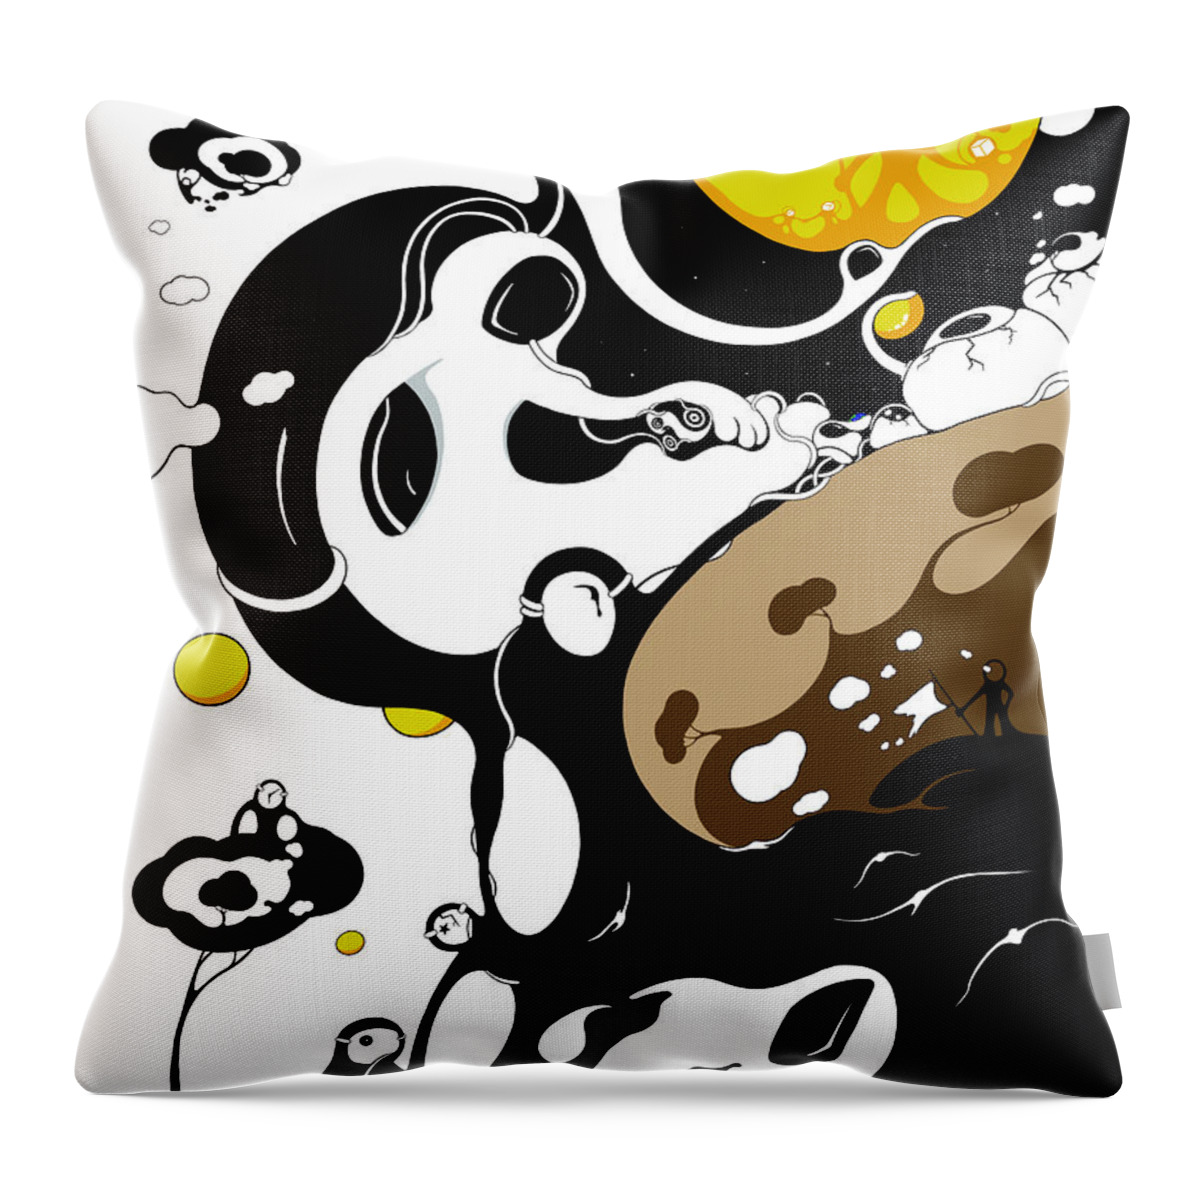 Space Throw Pillow featuring the digital art Escaping Annihilation by Craig Tilley